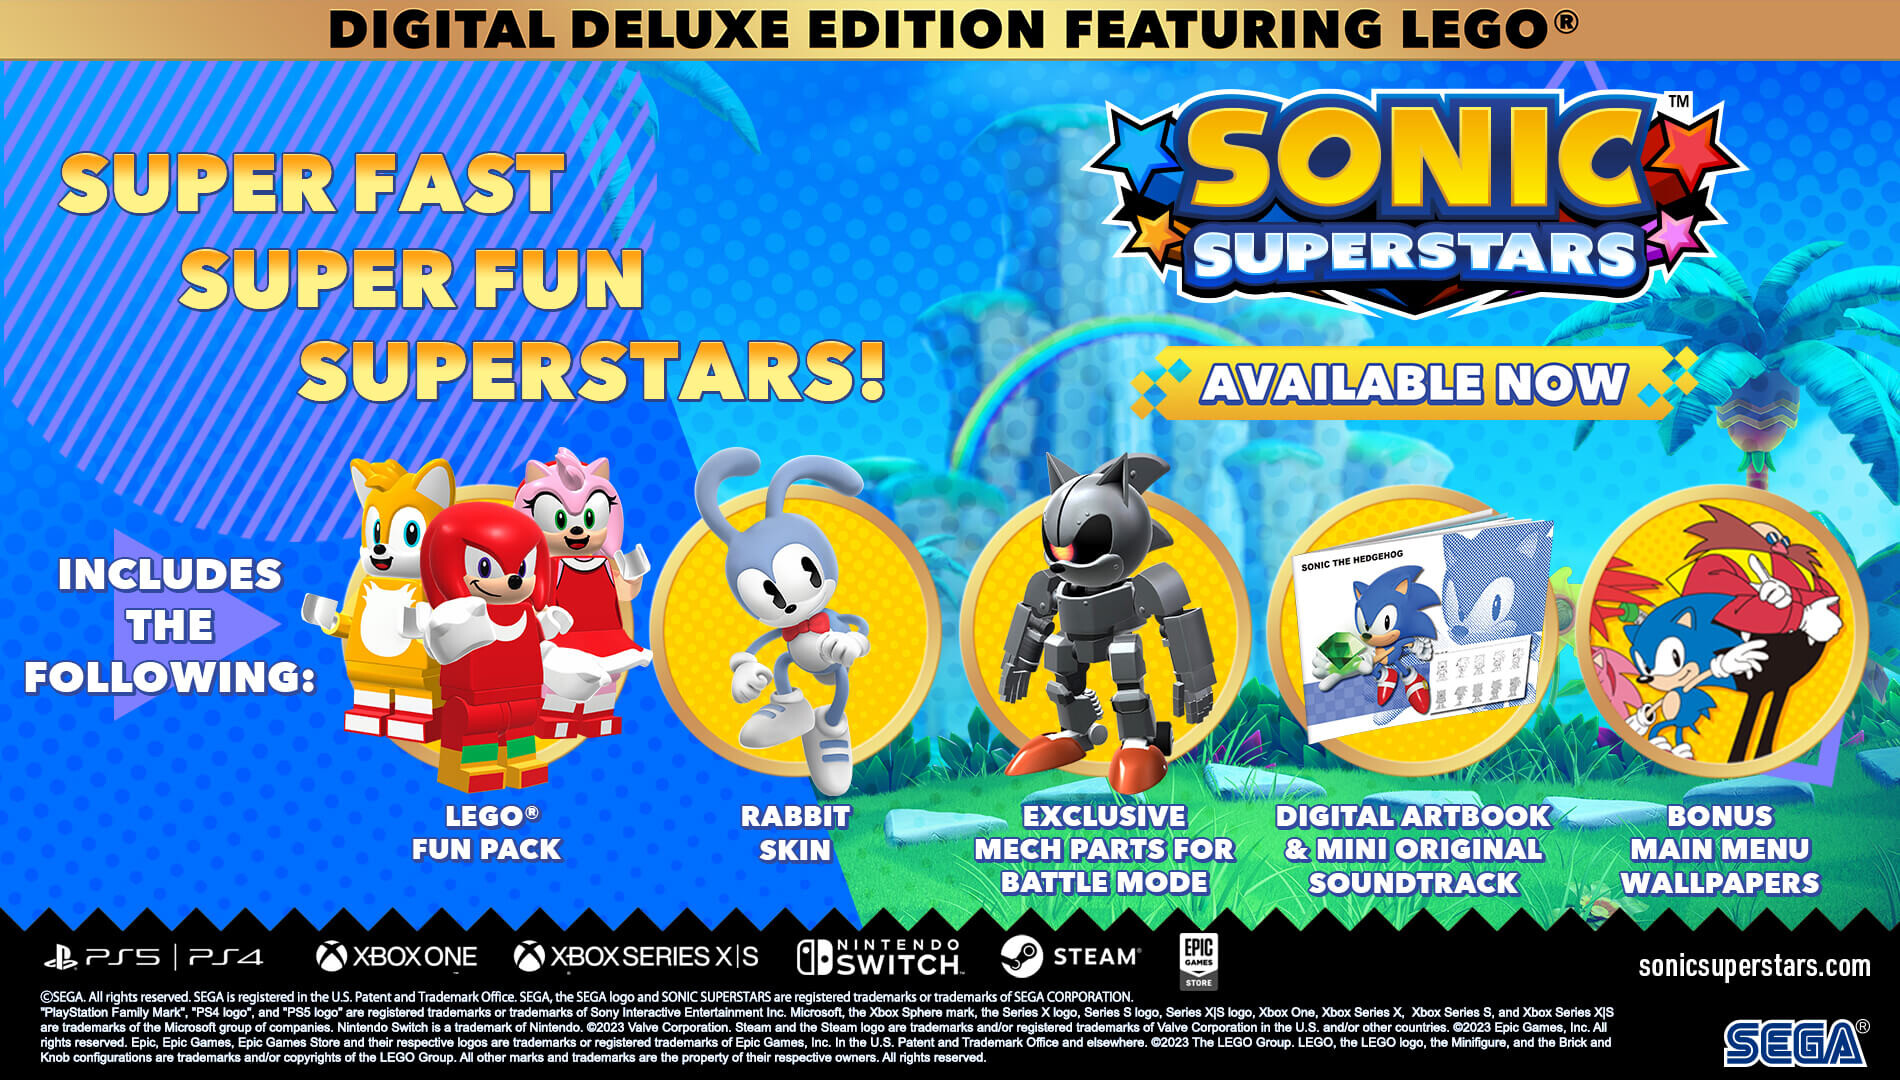 Sonic Superstars Is Available Now!